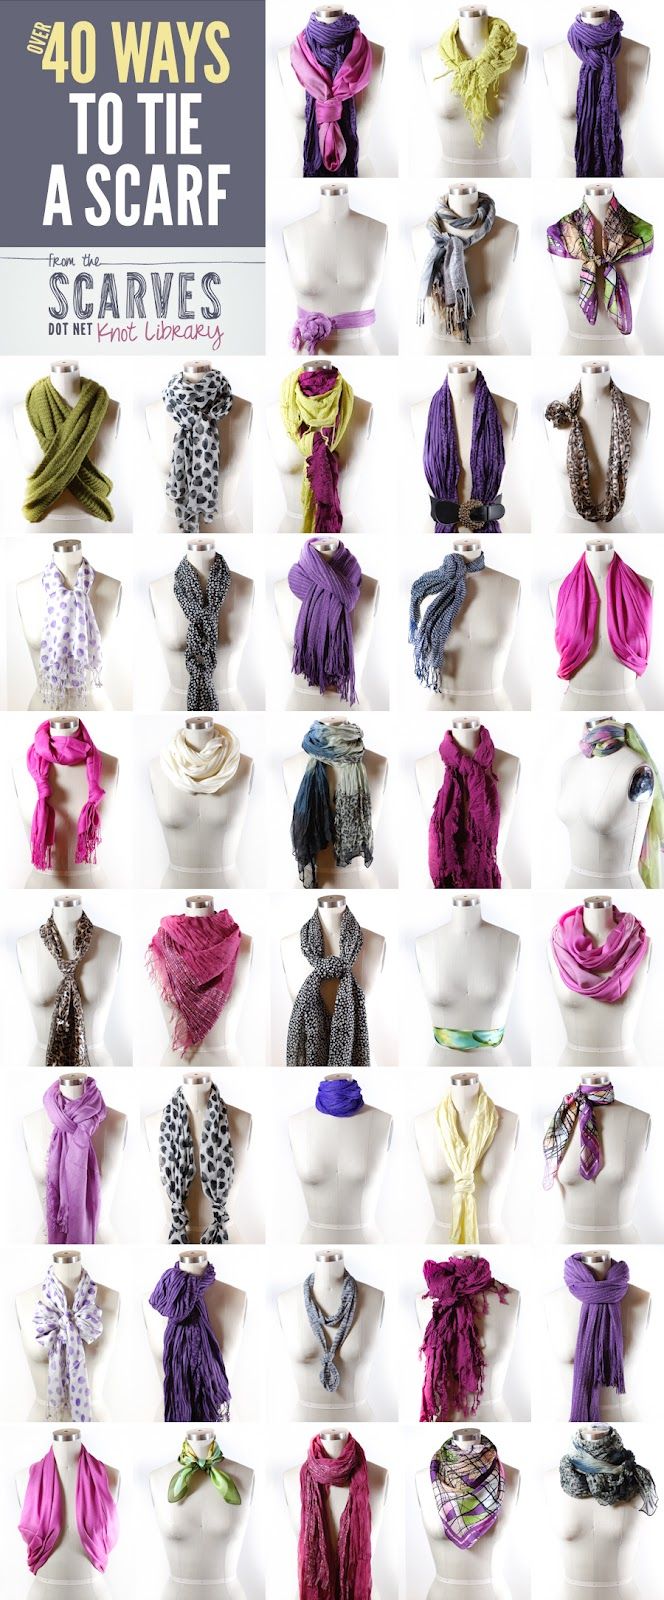 How to tie a scarf. I want this to be the year of scarf wearing.